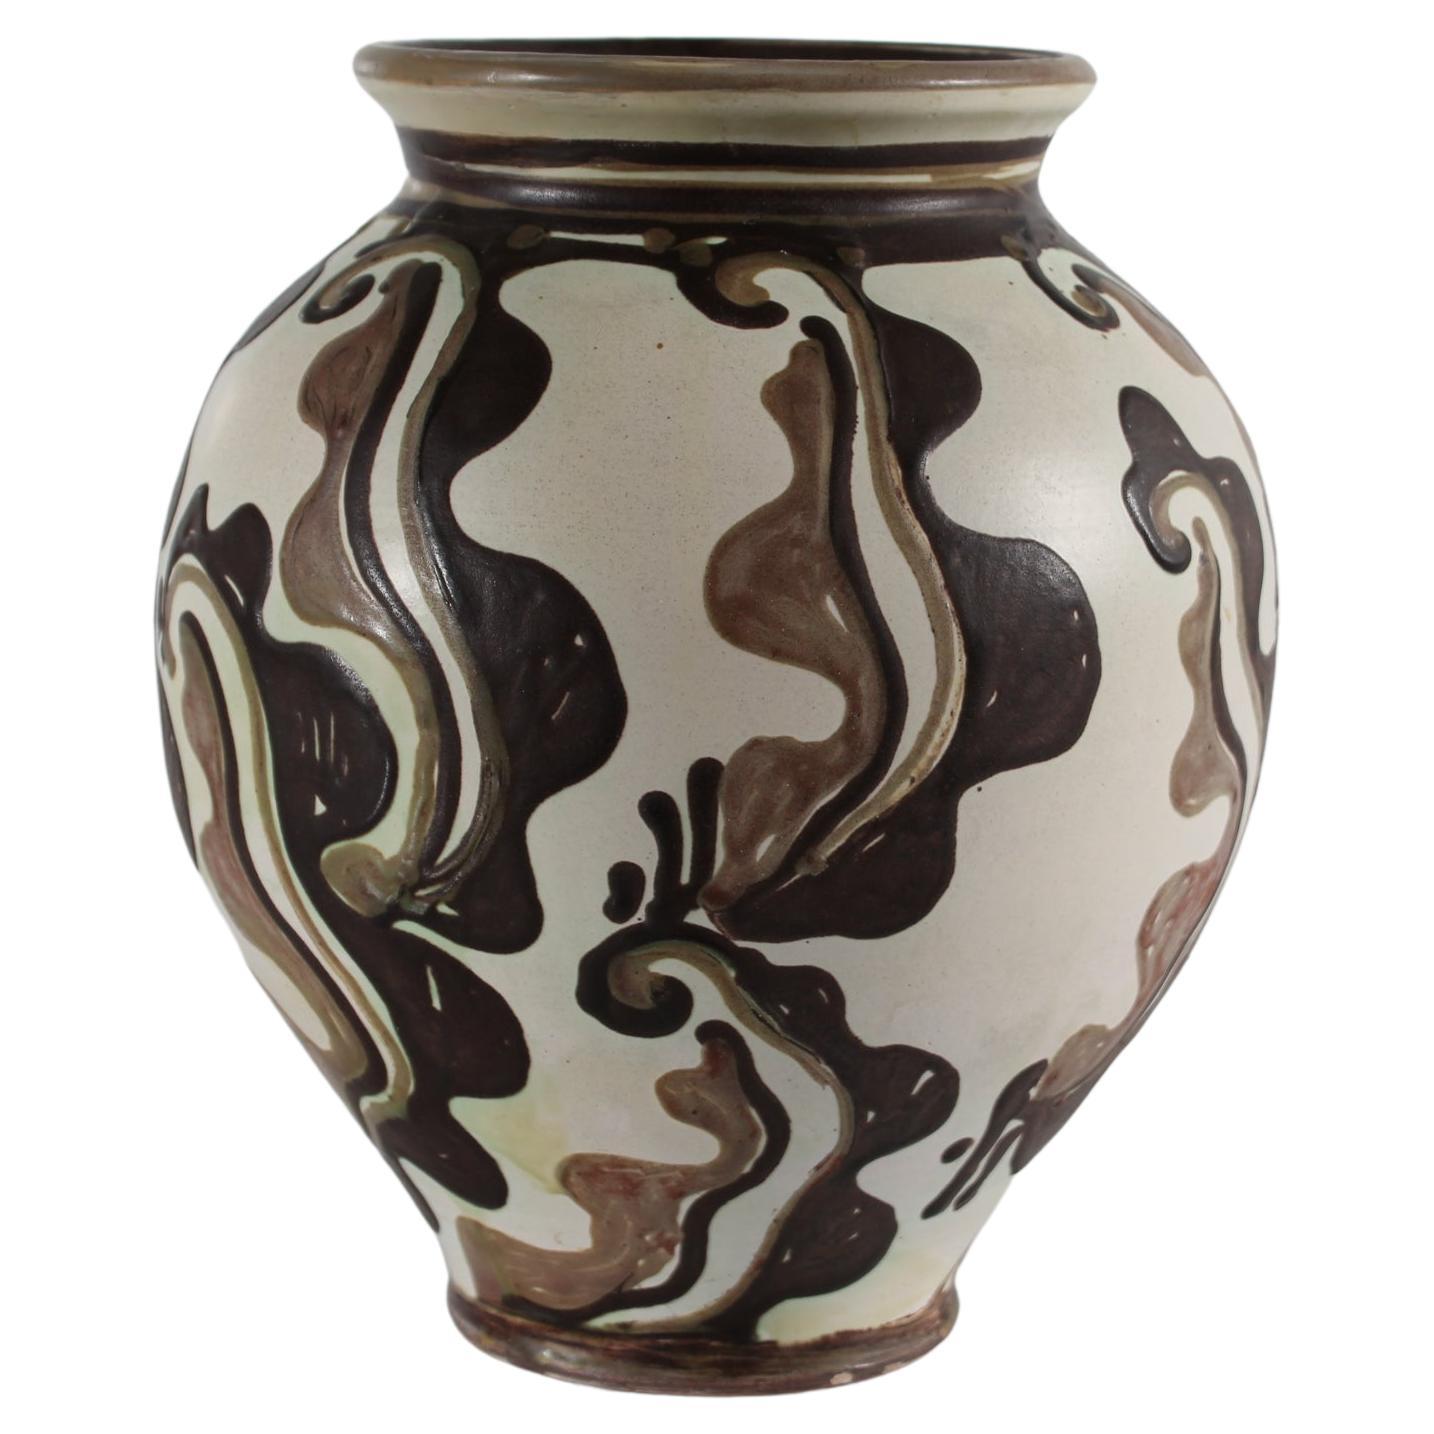 Danish ceramic handmade vase by Herman A. Kähler.
The vase has a matte sand colored basecoat with abstract hand-decorated pattern inspired by aquatic plants  in brown and light brown colours.
The decoration is most likely by the painter Elisabeth